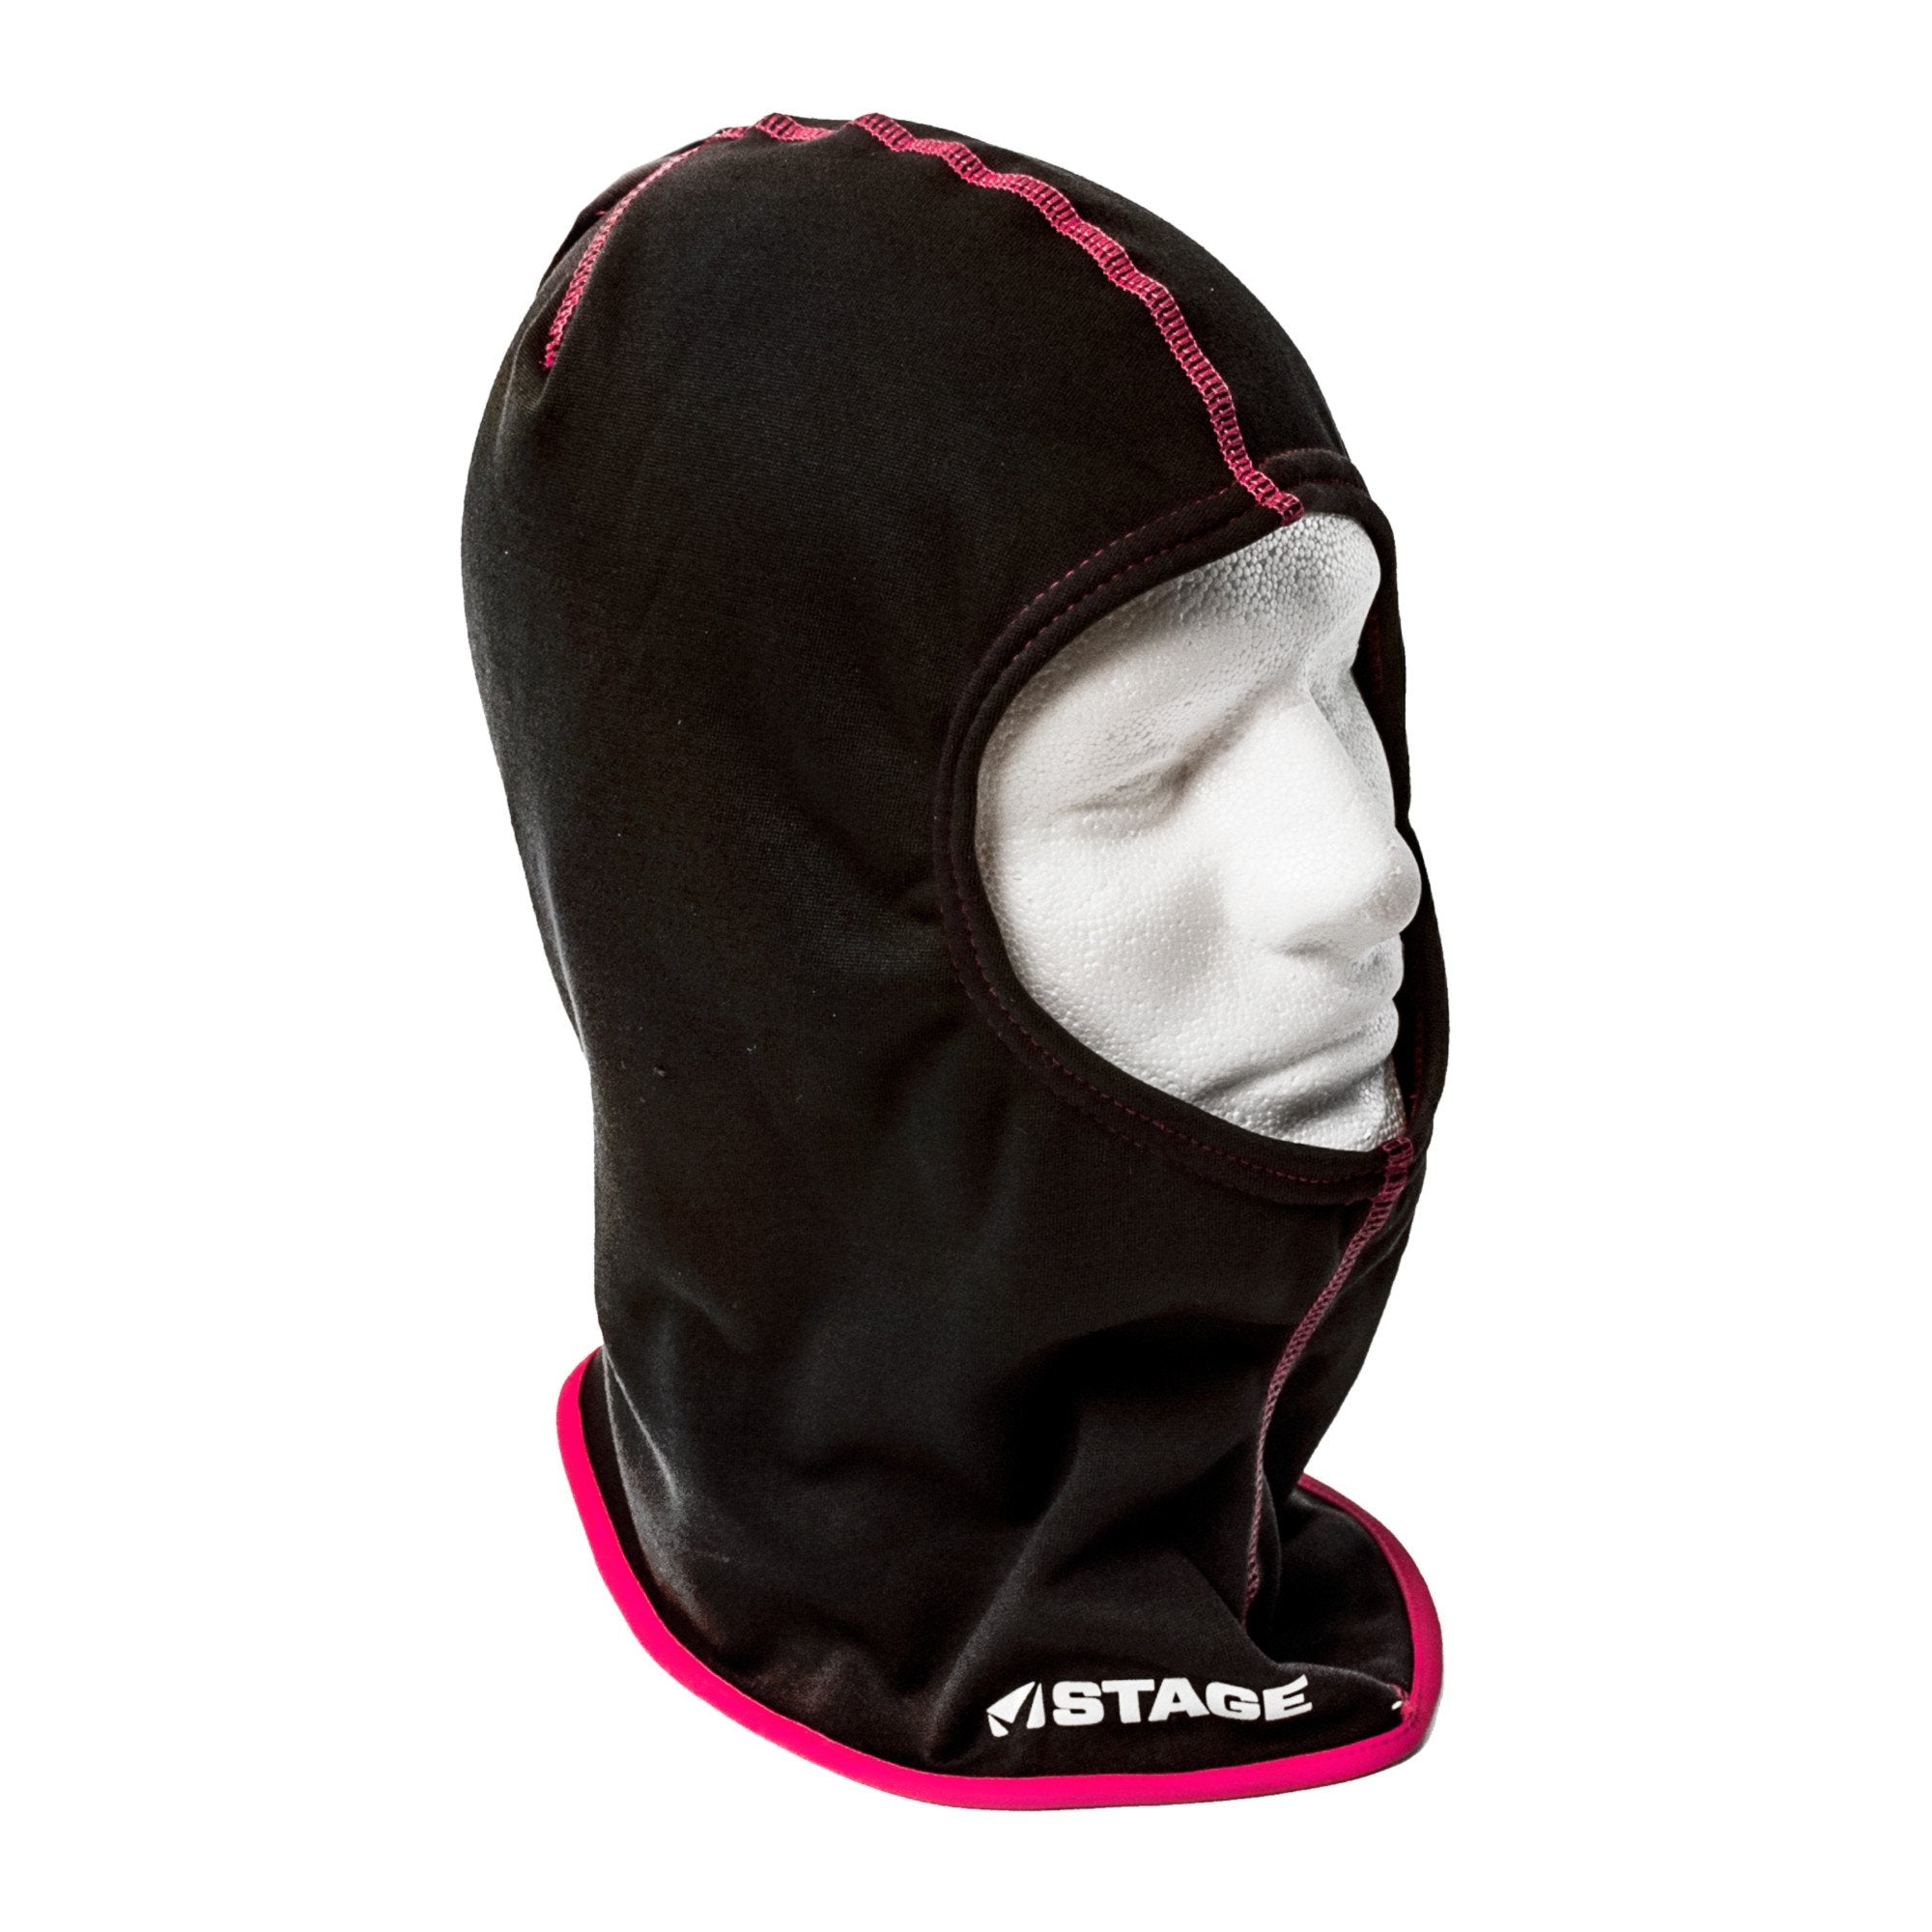 - Soft Micro Fleece fits comfortably on face - Great for any winter sport - Unisex - Quick Dry Material - Fits under helmets